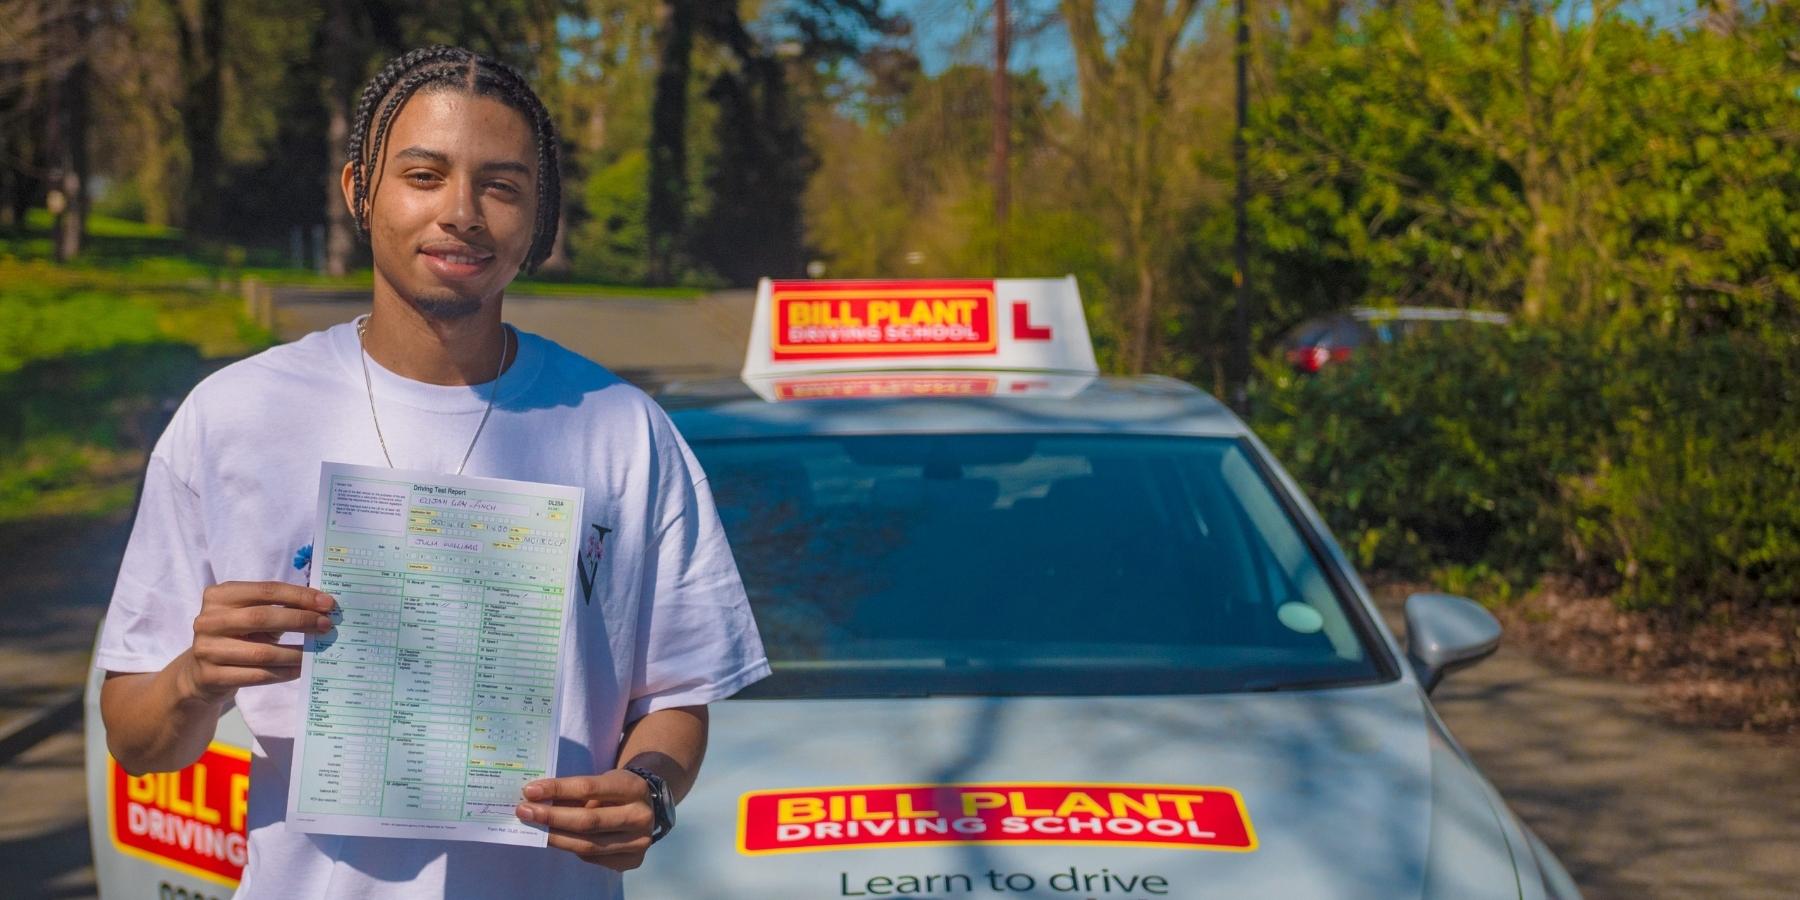 A learner driver celebrates passing their test with Bill Plant Driving School